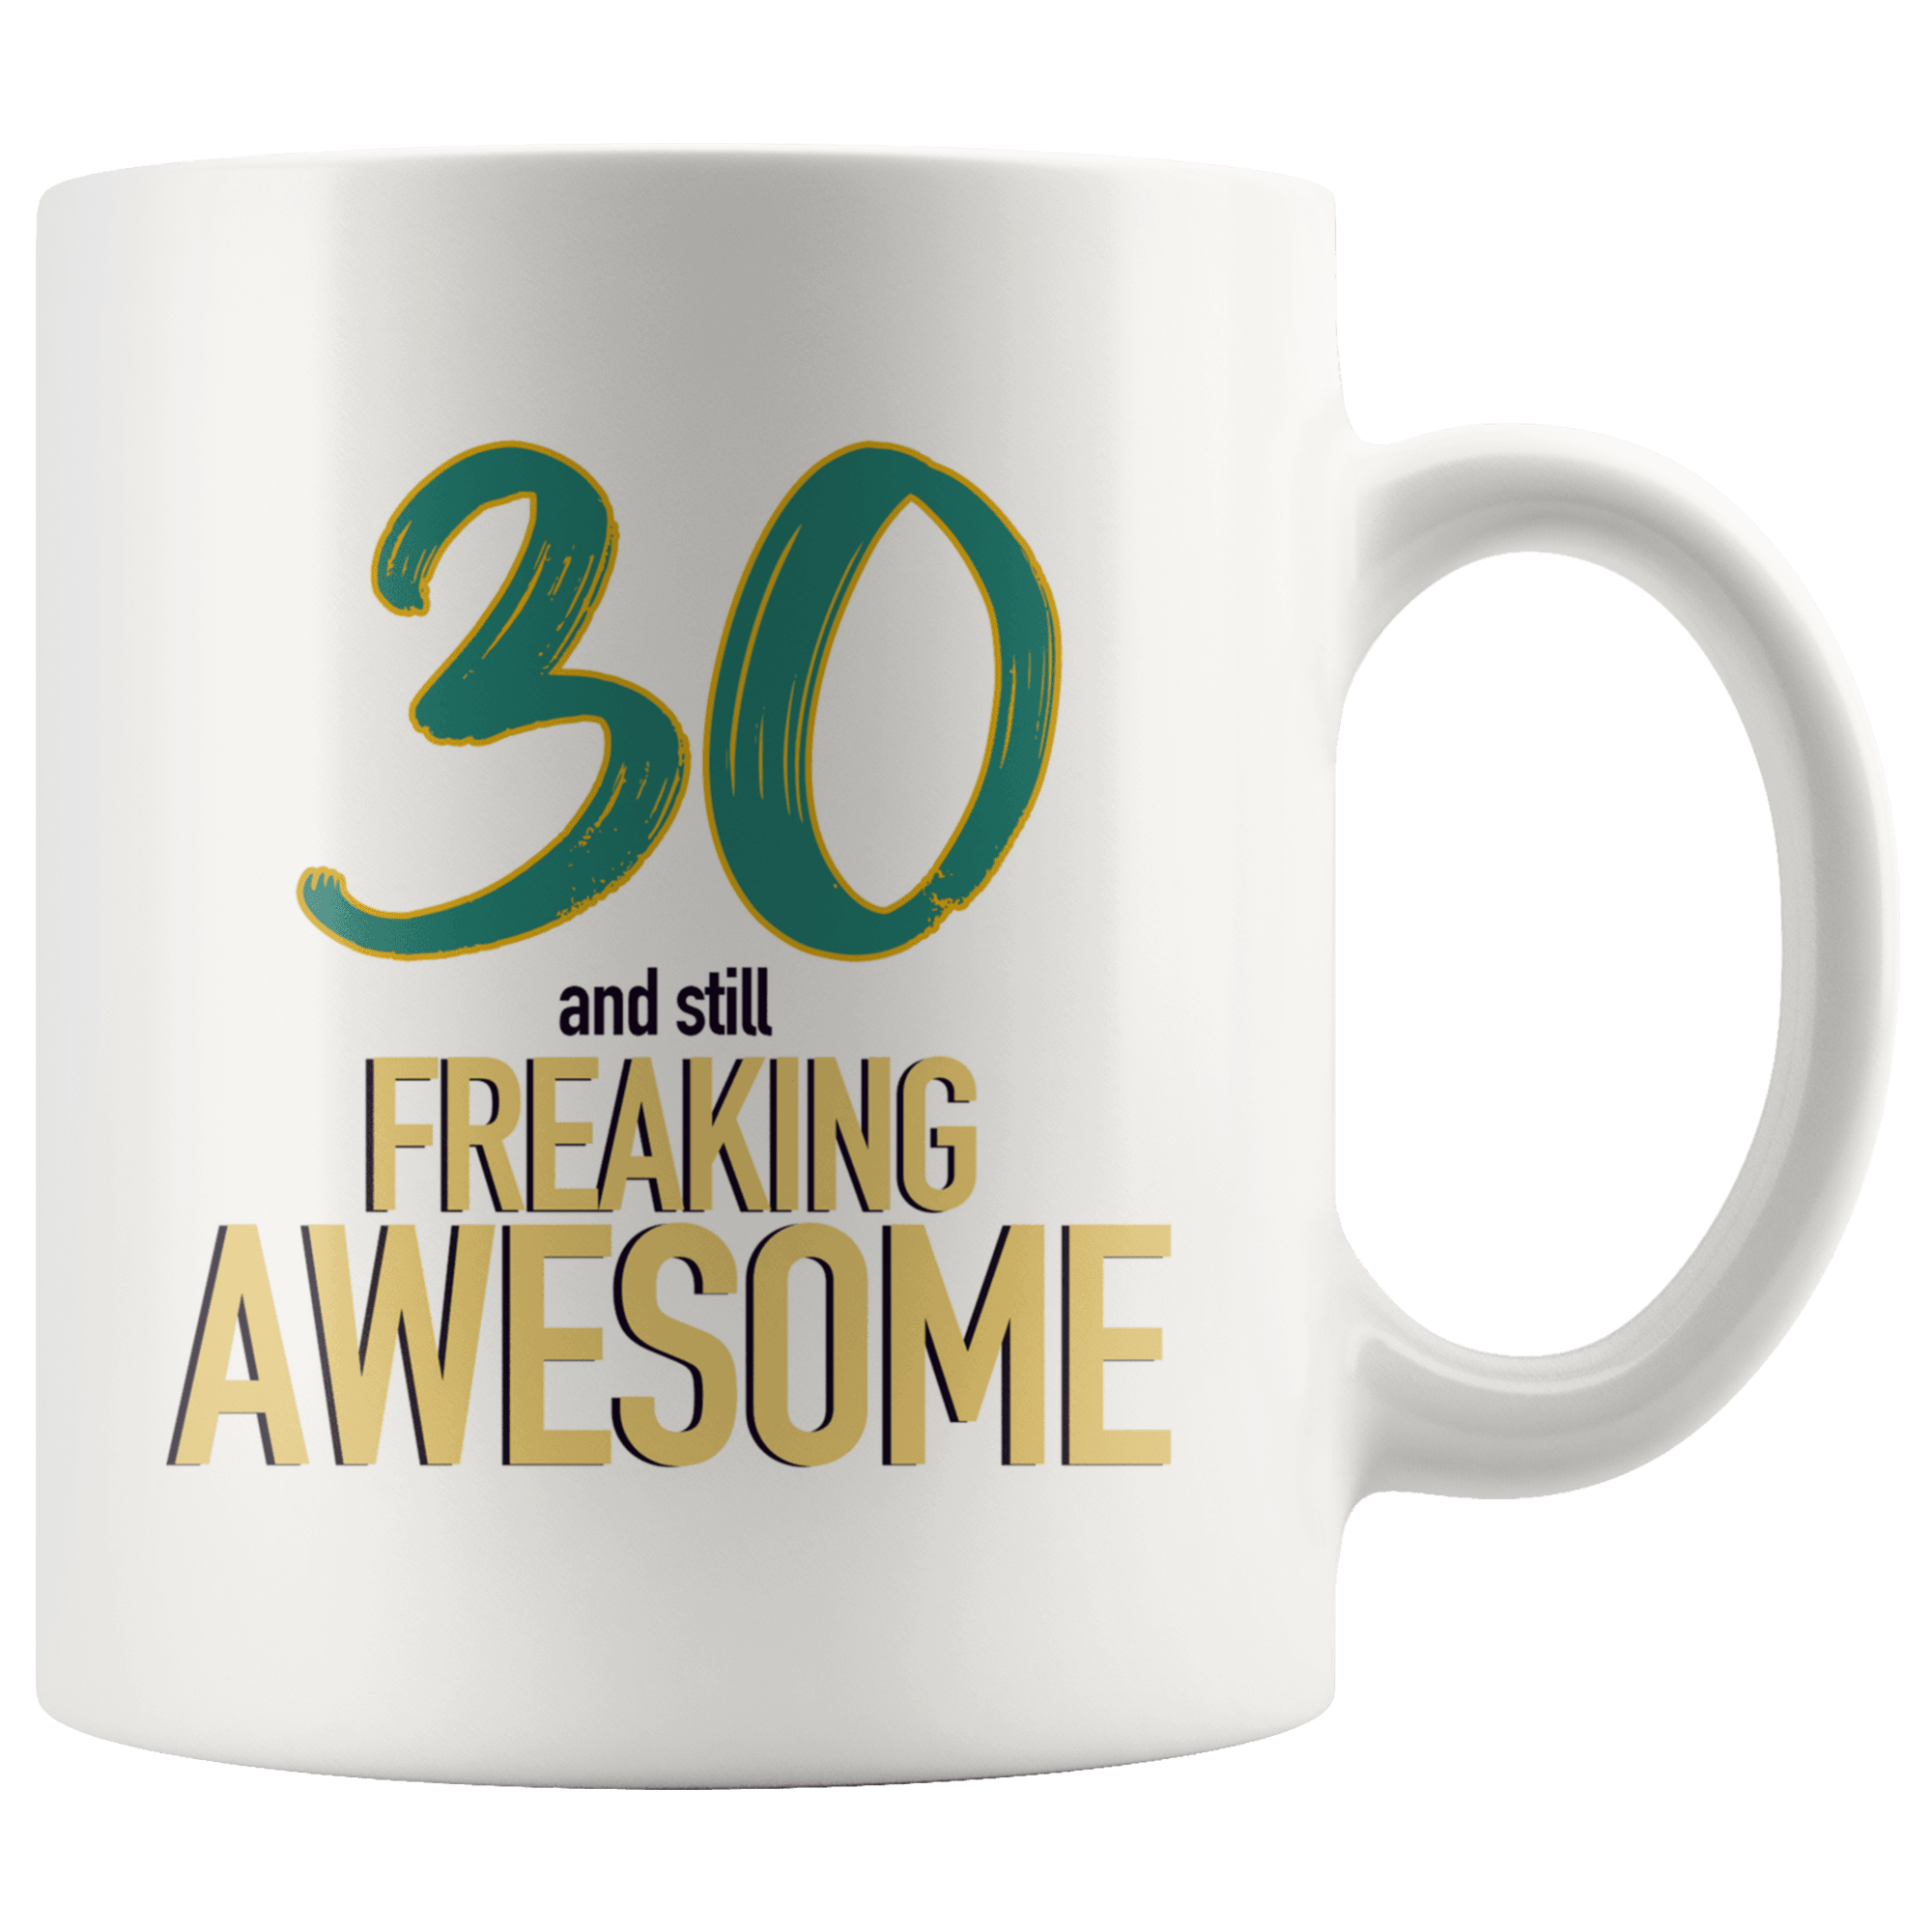 30 And Still Freaking Awesome - 30th Birthday Coffee Mug - Great Gift For Men and Women Celebrating 30 Years Old Birthday - Meaningful For Someone Reaching Thirtieth Birthday. - SPCM